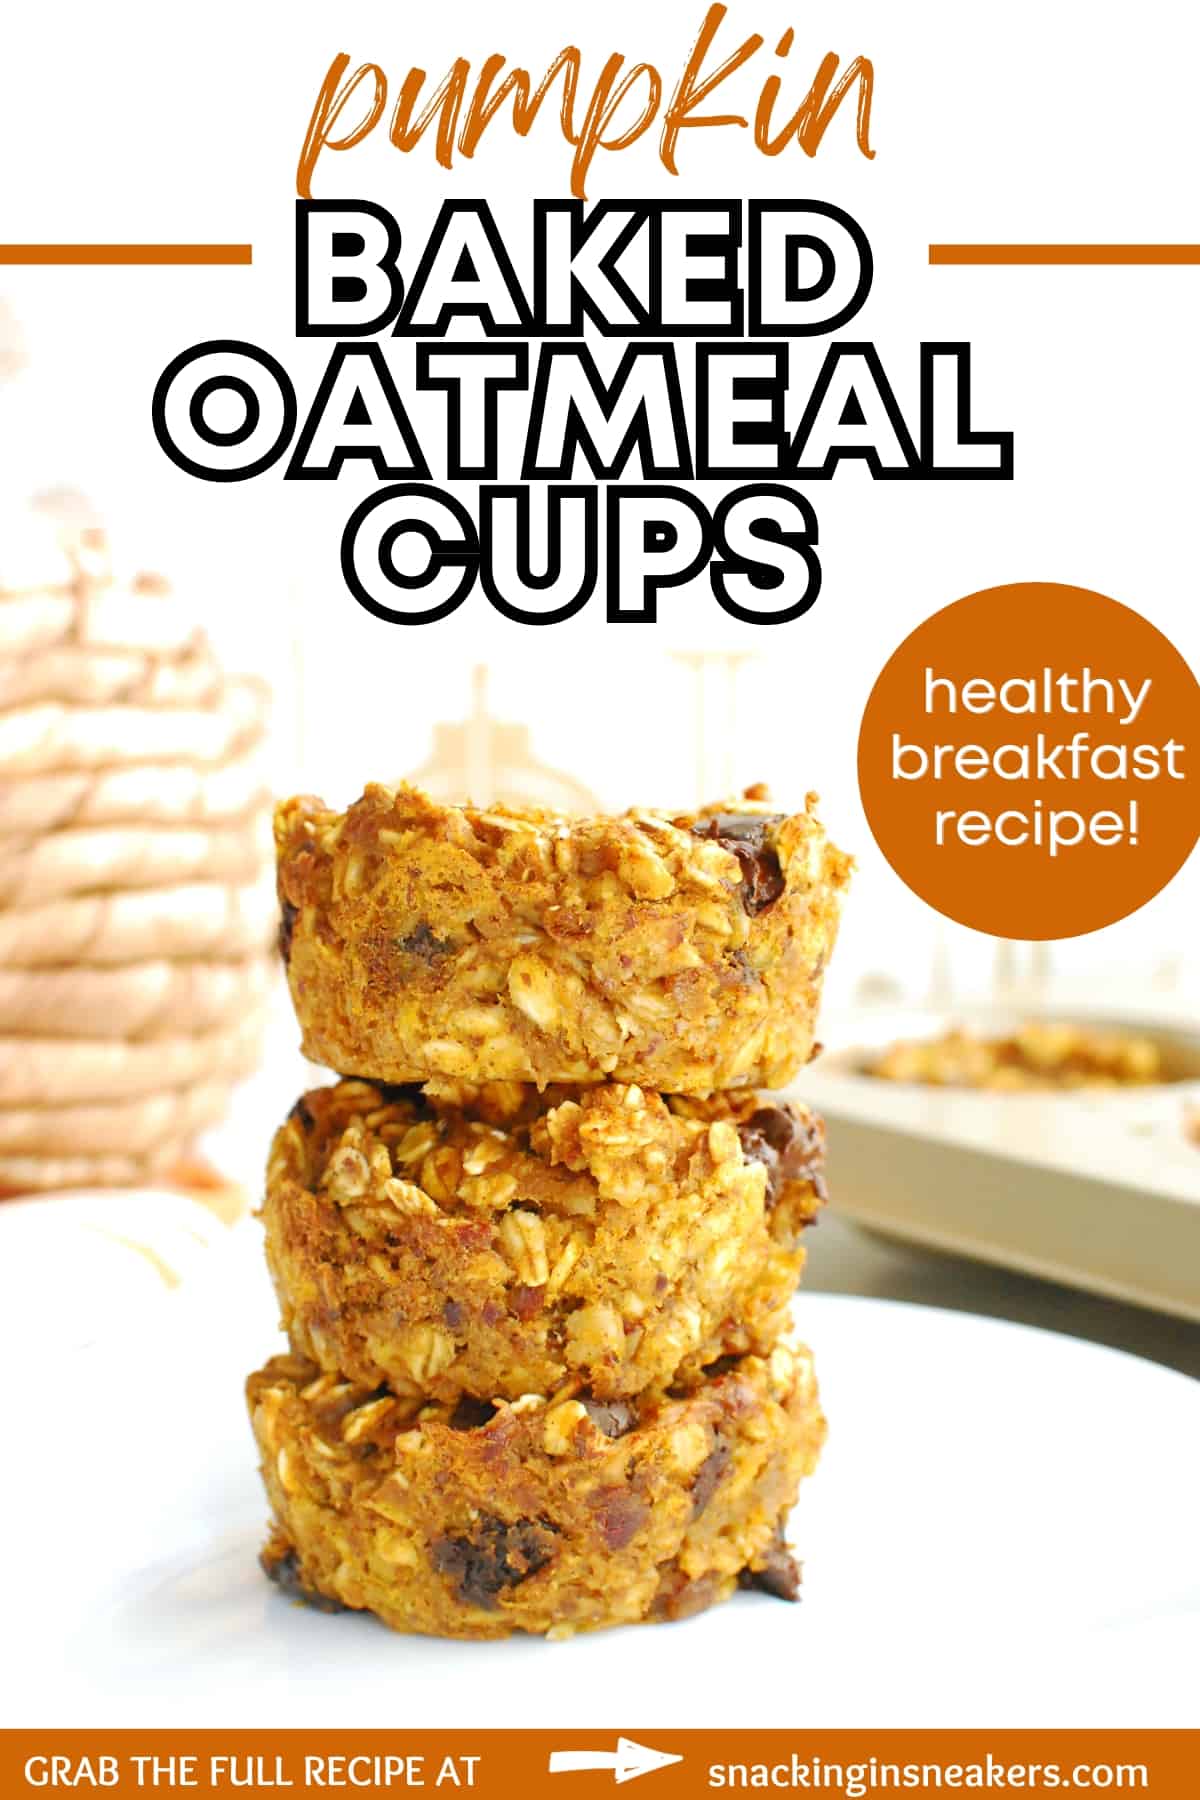 Three pumpkin baked oatmeal cups on a plate with a text overlay with the name of the recipe.